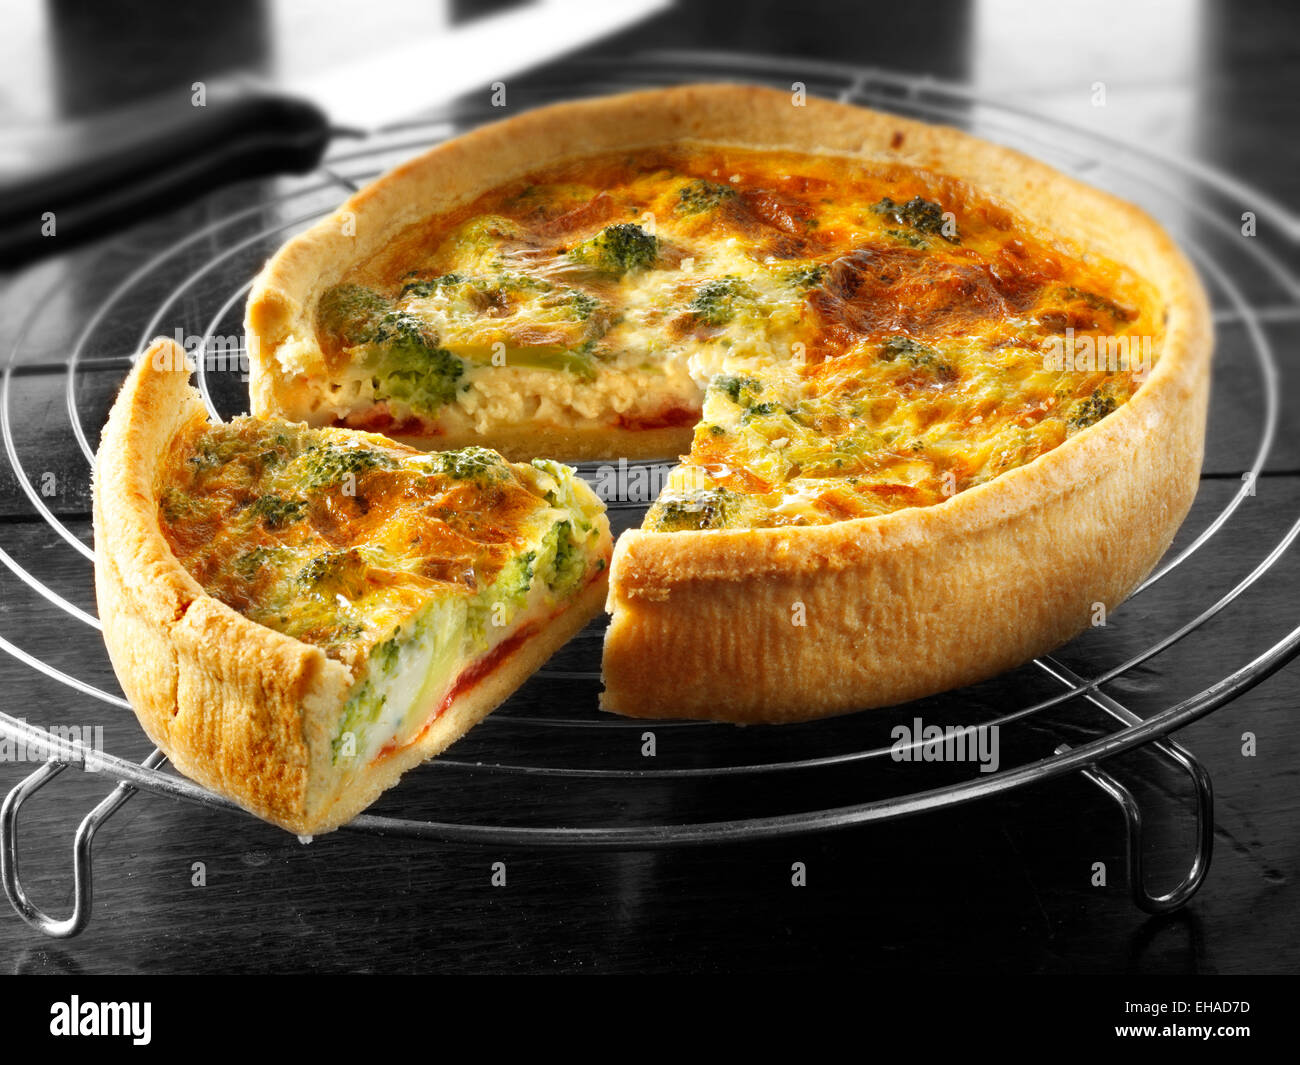 Whole broccoli quiche with a slice out Stock Photo